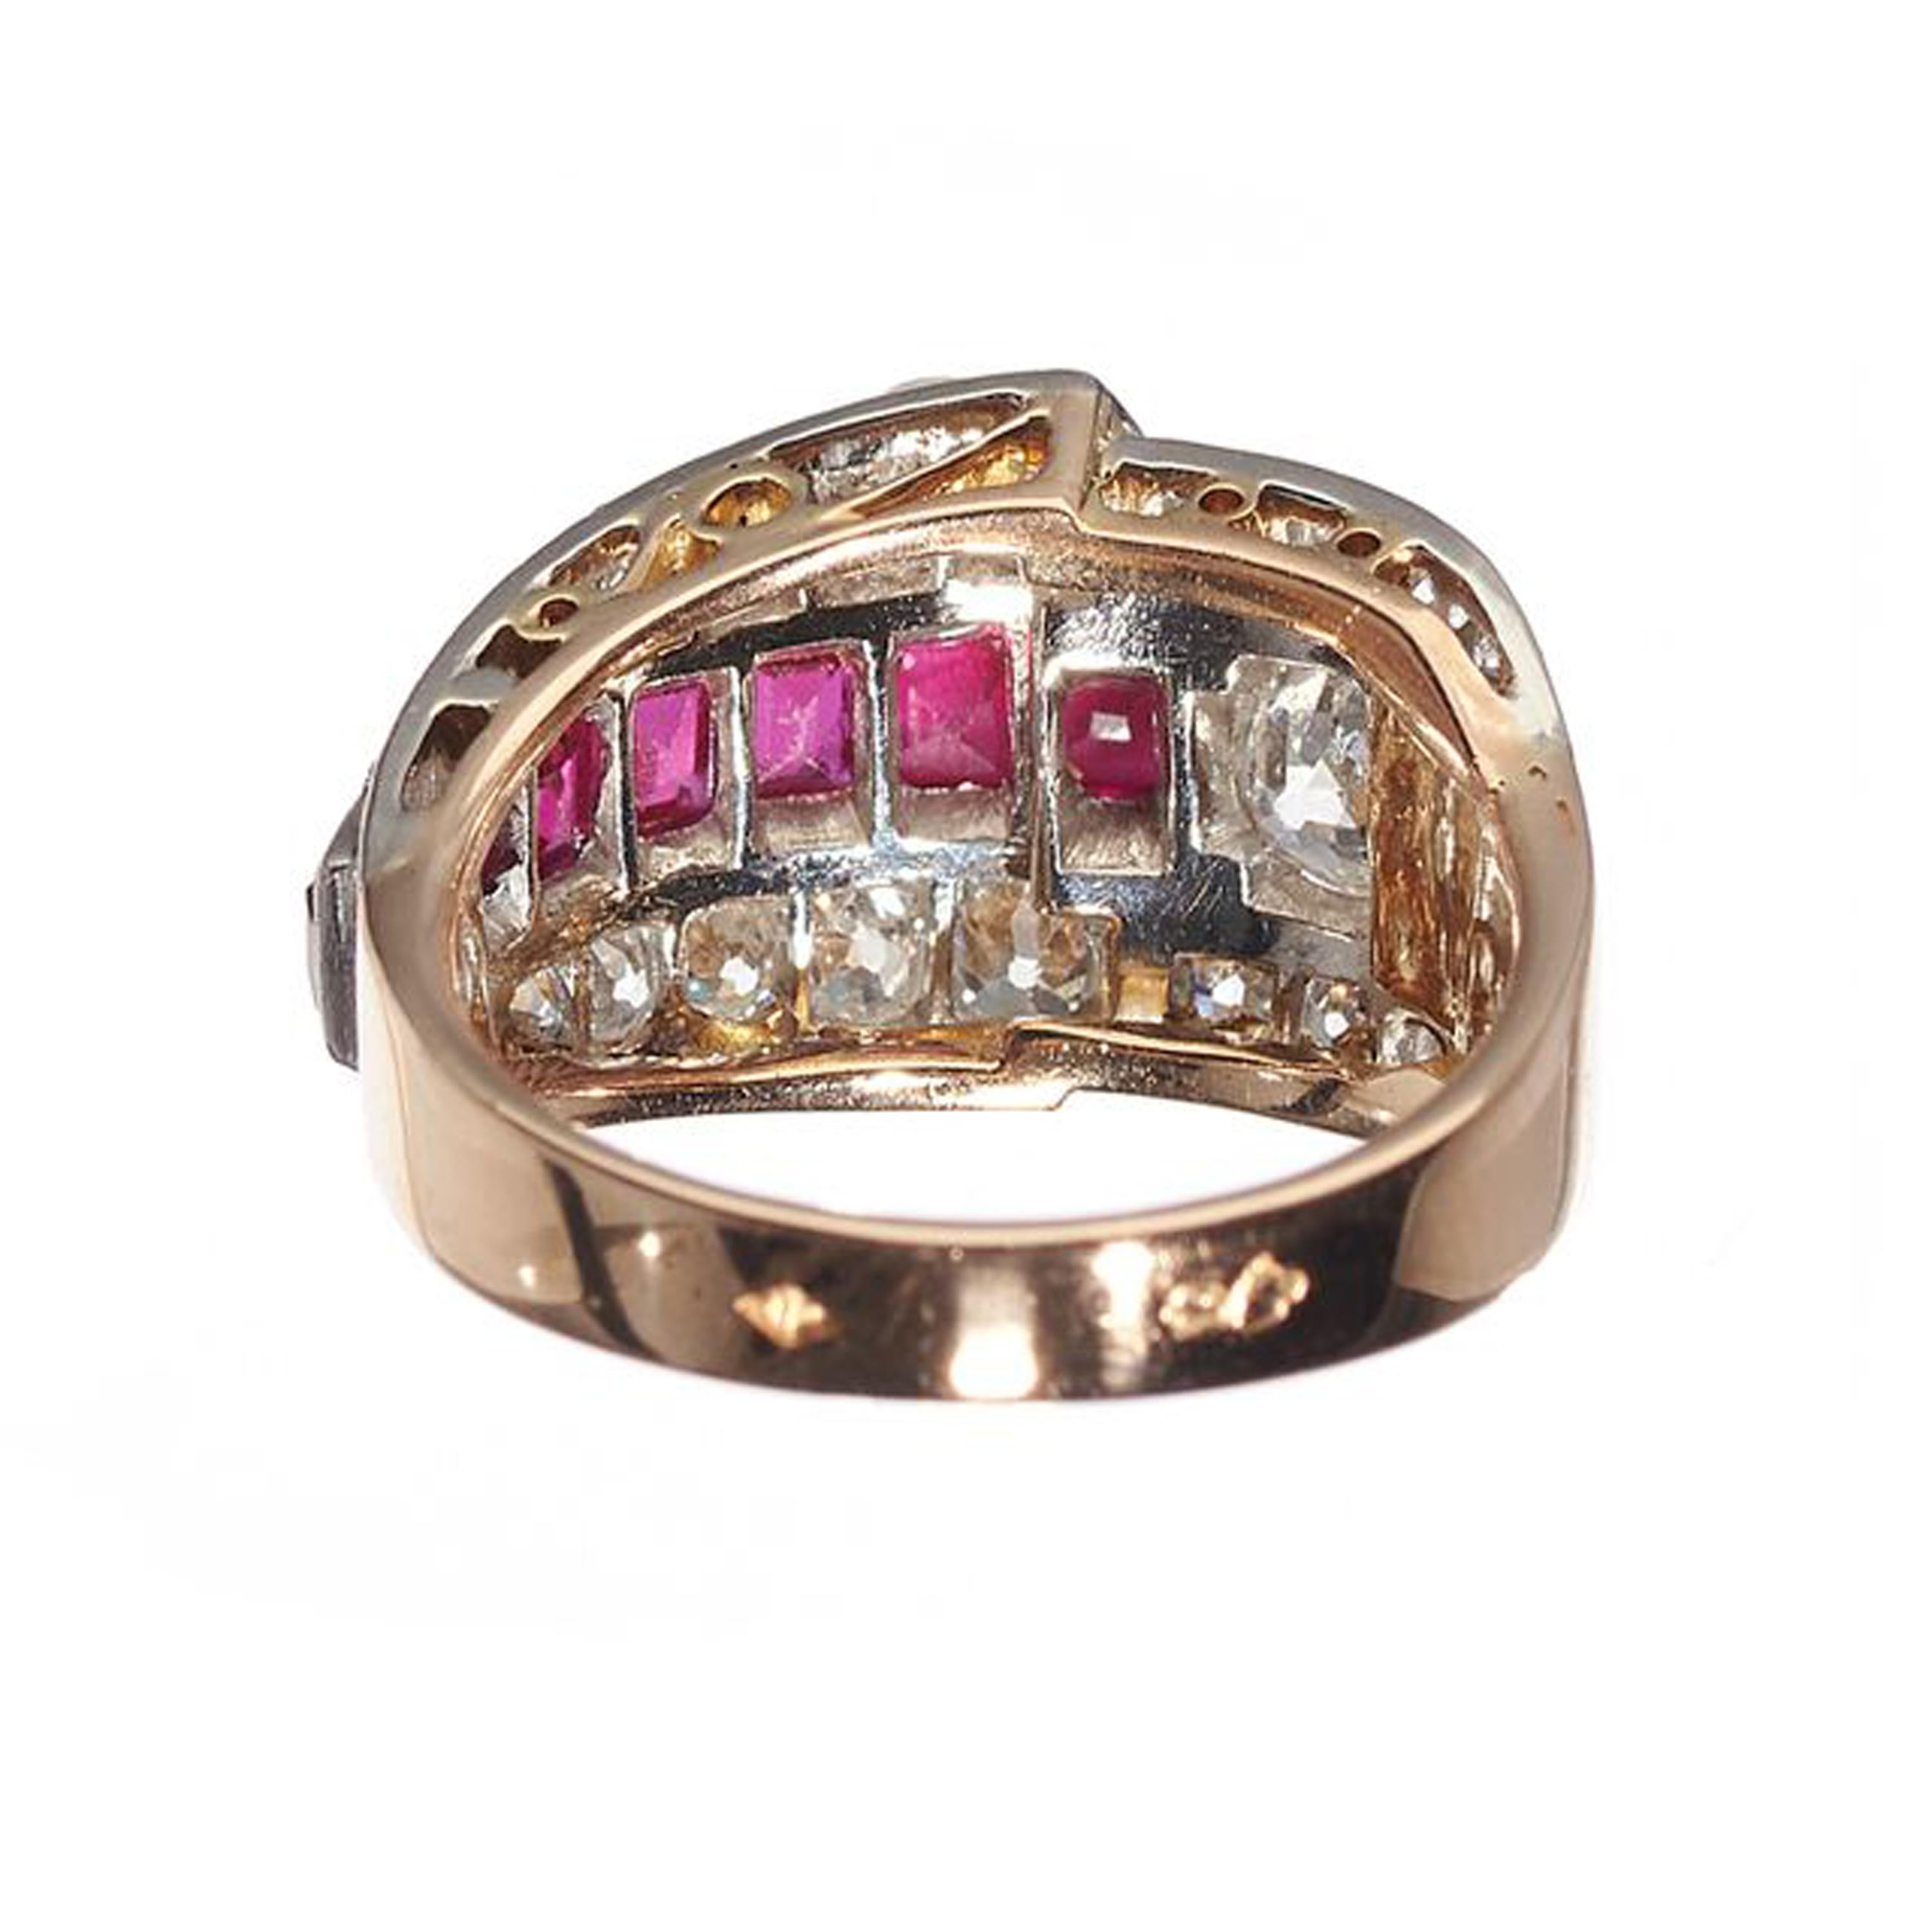 Women's A.F. Souteyrand French Art Deco Ruby Diamond Platinum and Gold Ring, Circa 1935 For Sale